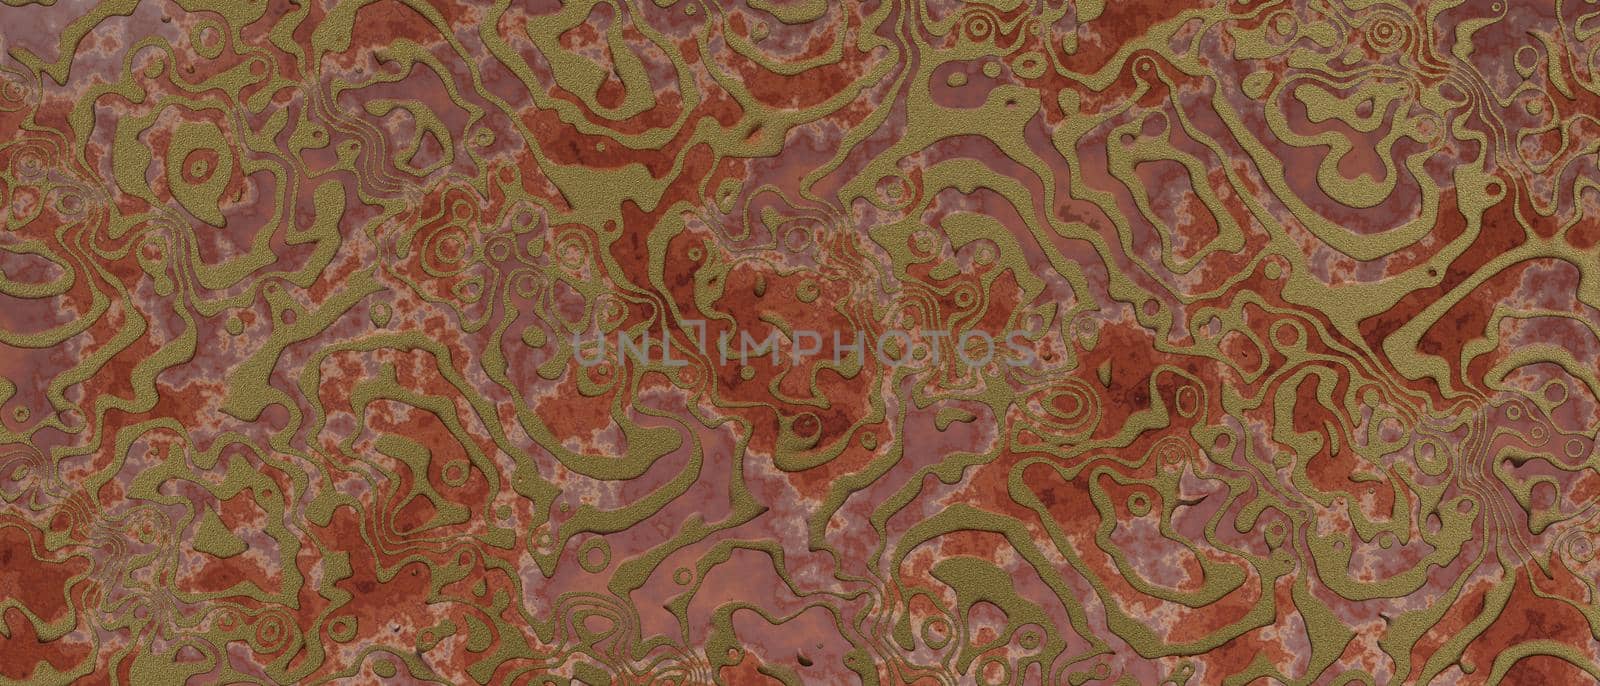 Unique red marble gold veined texture background wallpaper